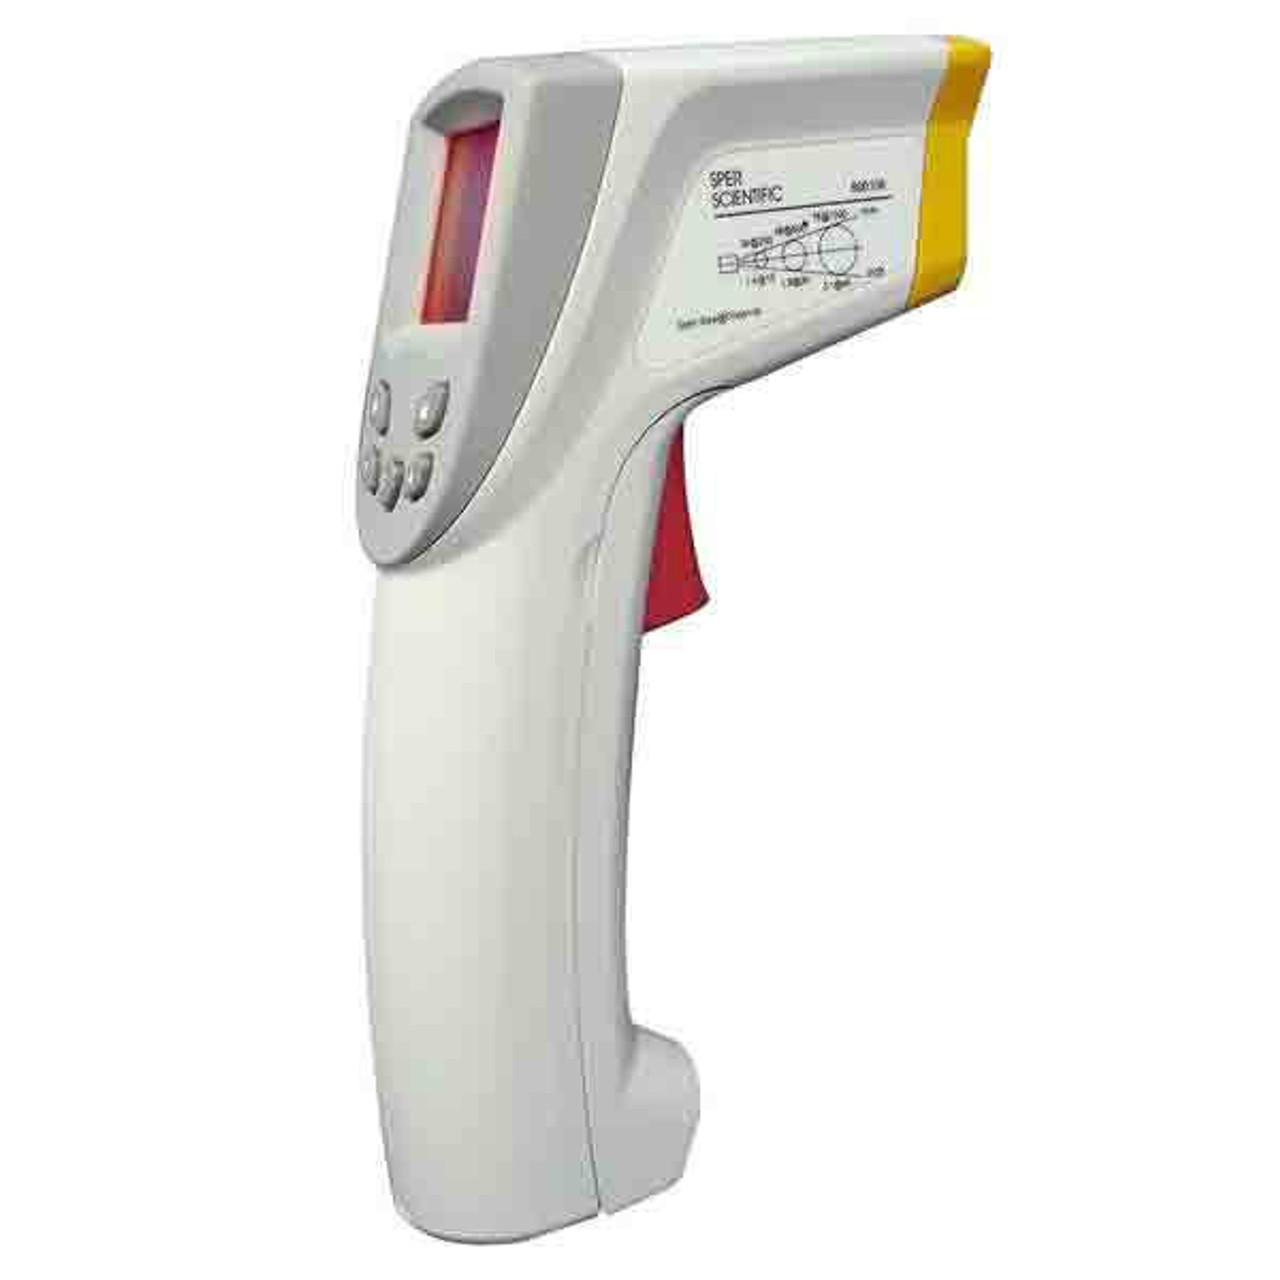 THERMO-WORKS IR-GUNS-S INFRARED THERMOMETERS (QTY-20)